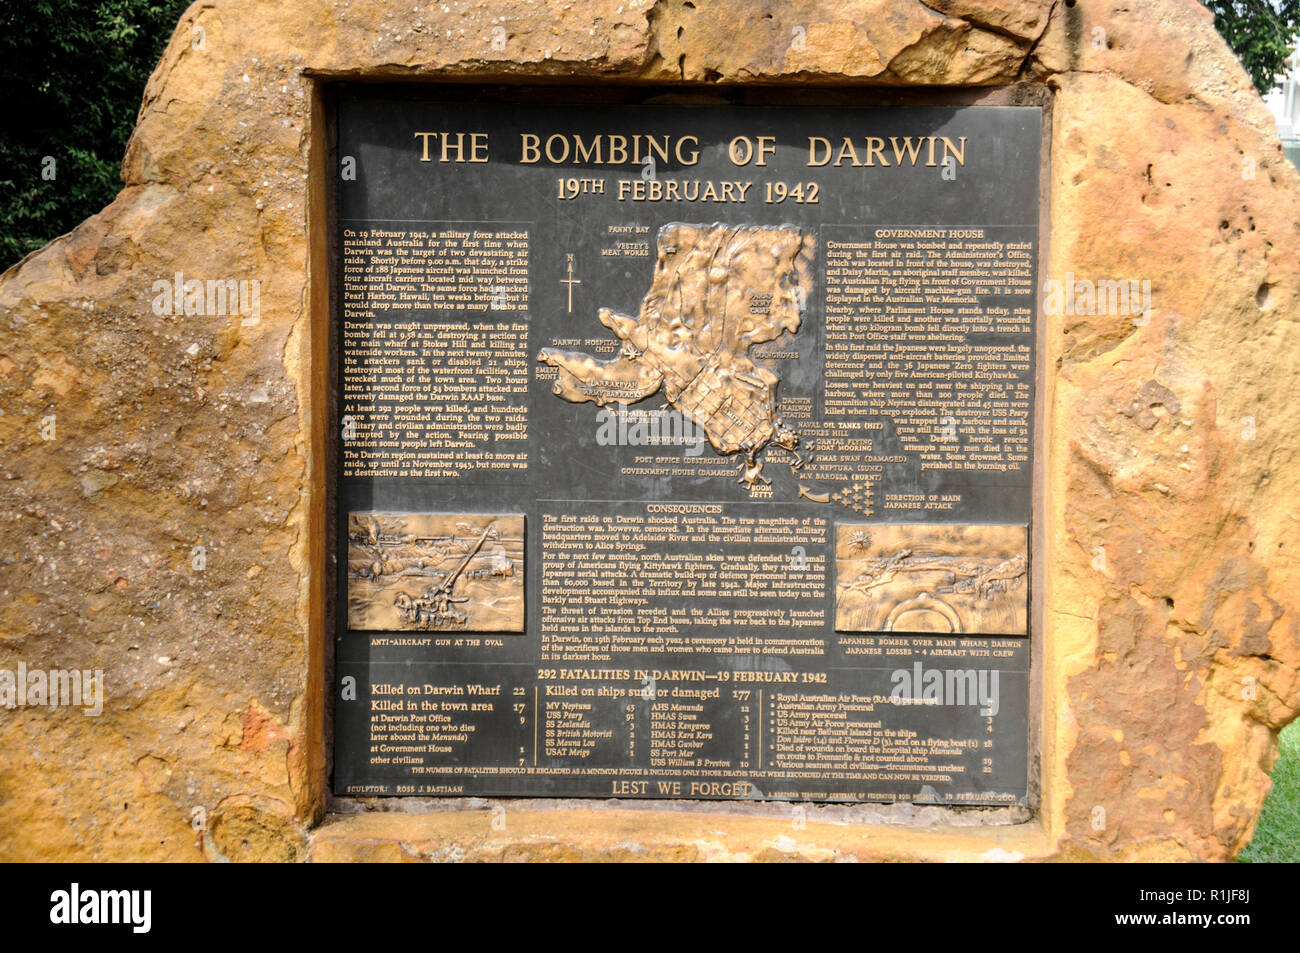 The bombing of Darwin memorial to the victims of the Japanese bombing of Darwin,  on the 19th February 1942, at Darwin in the Northern Territory, Aust Stock Photo